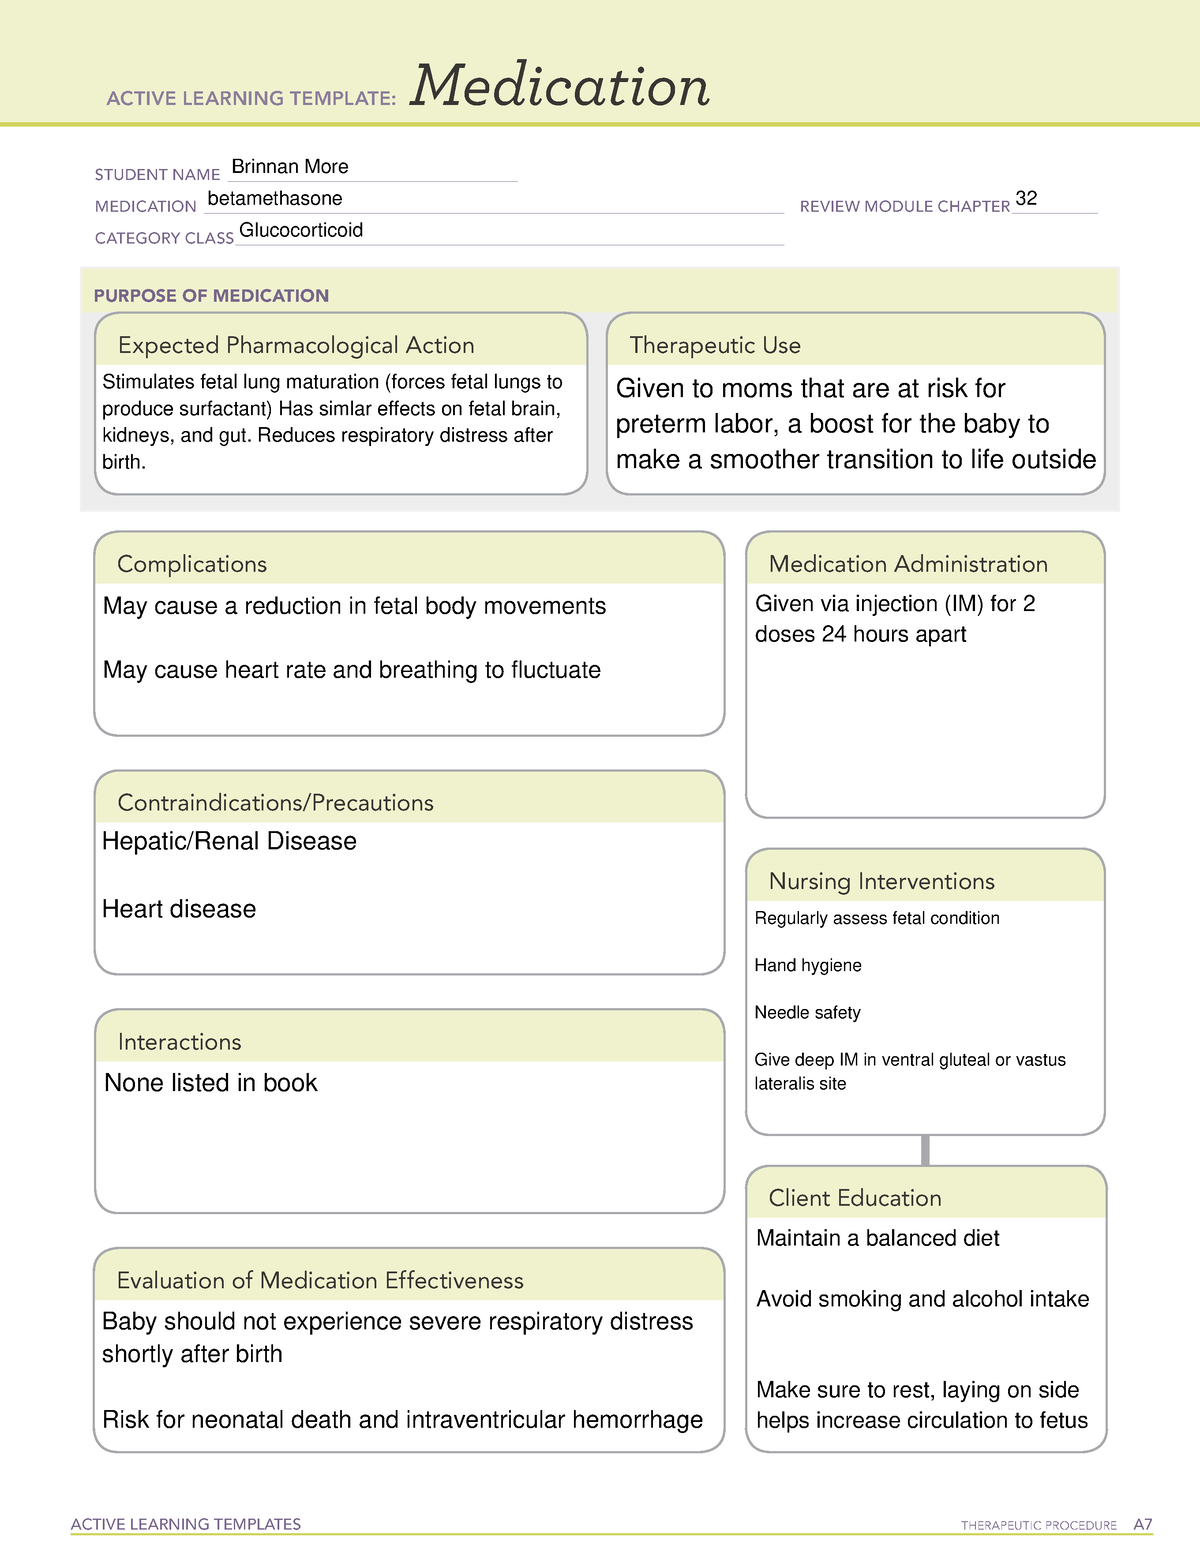 Betamethasone Active Learning Template ACTIVE LEARNING TEMPLATES